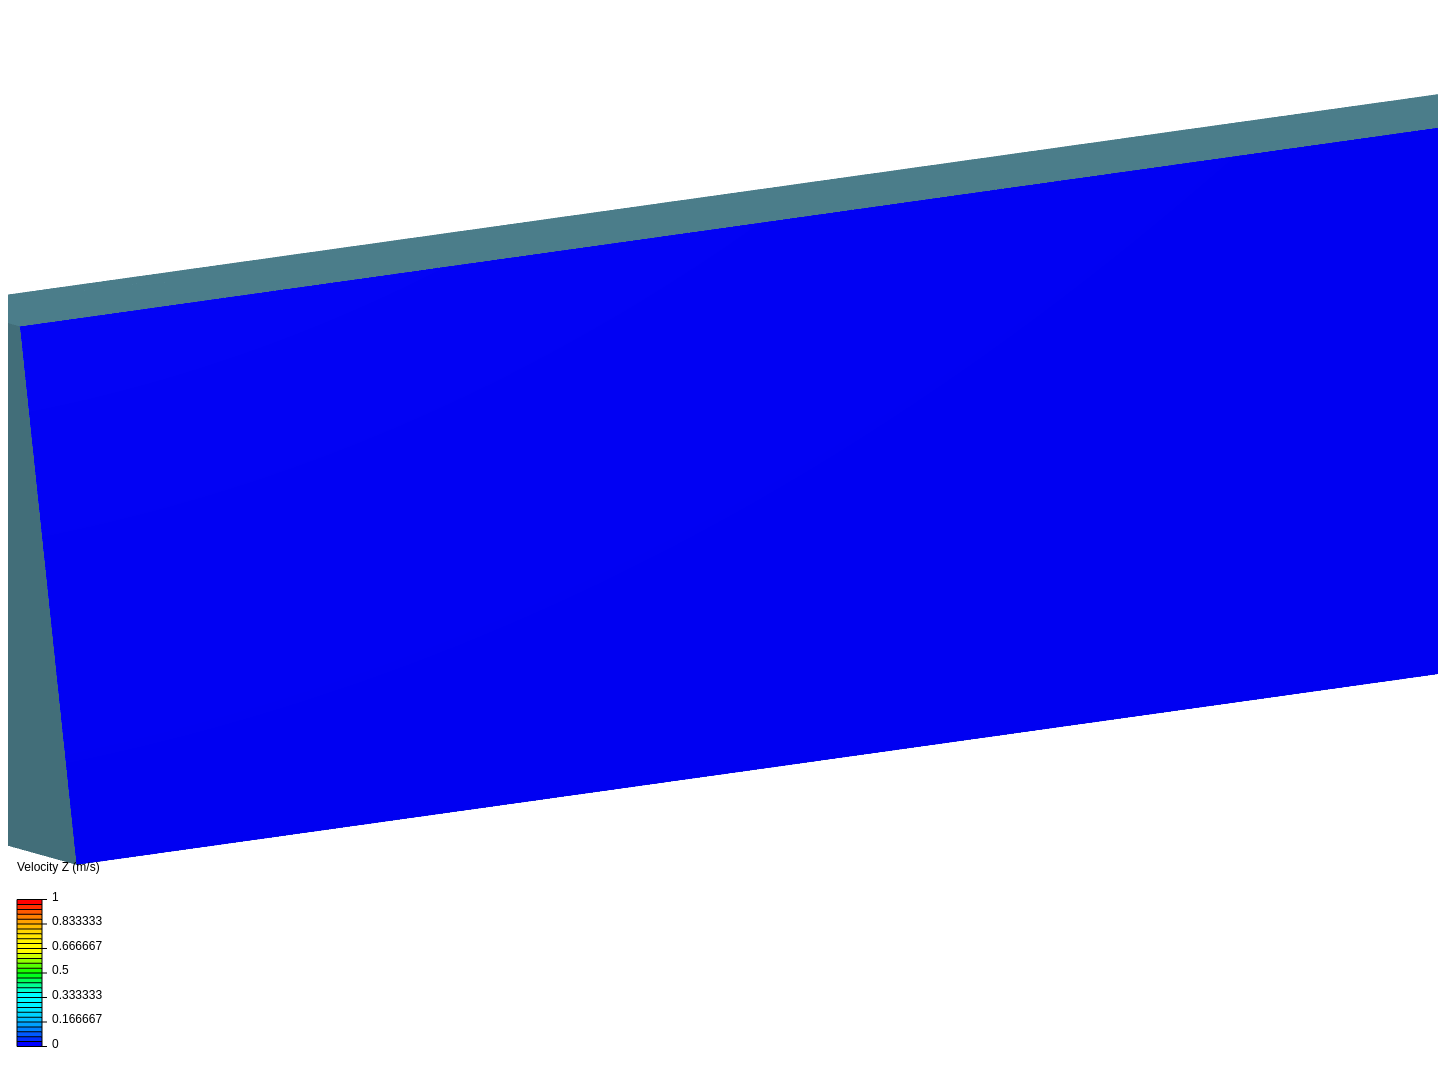 Boundary-layer Flow image